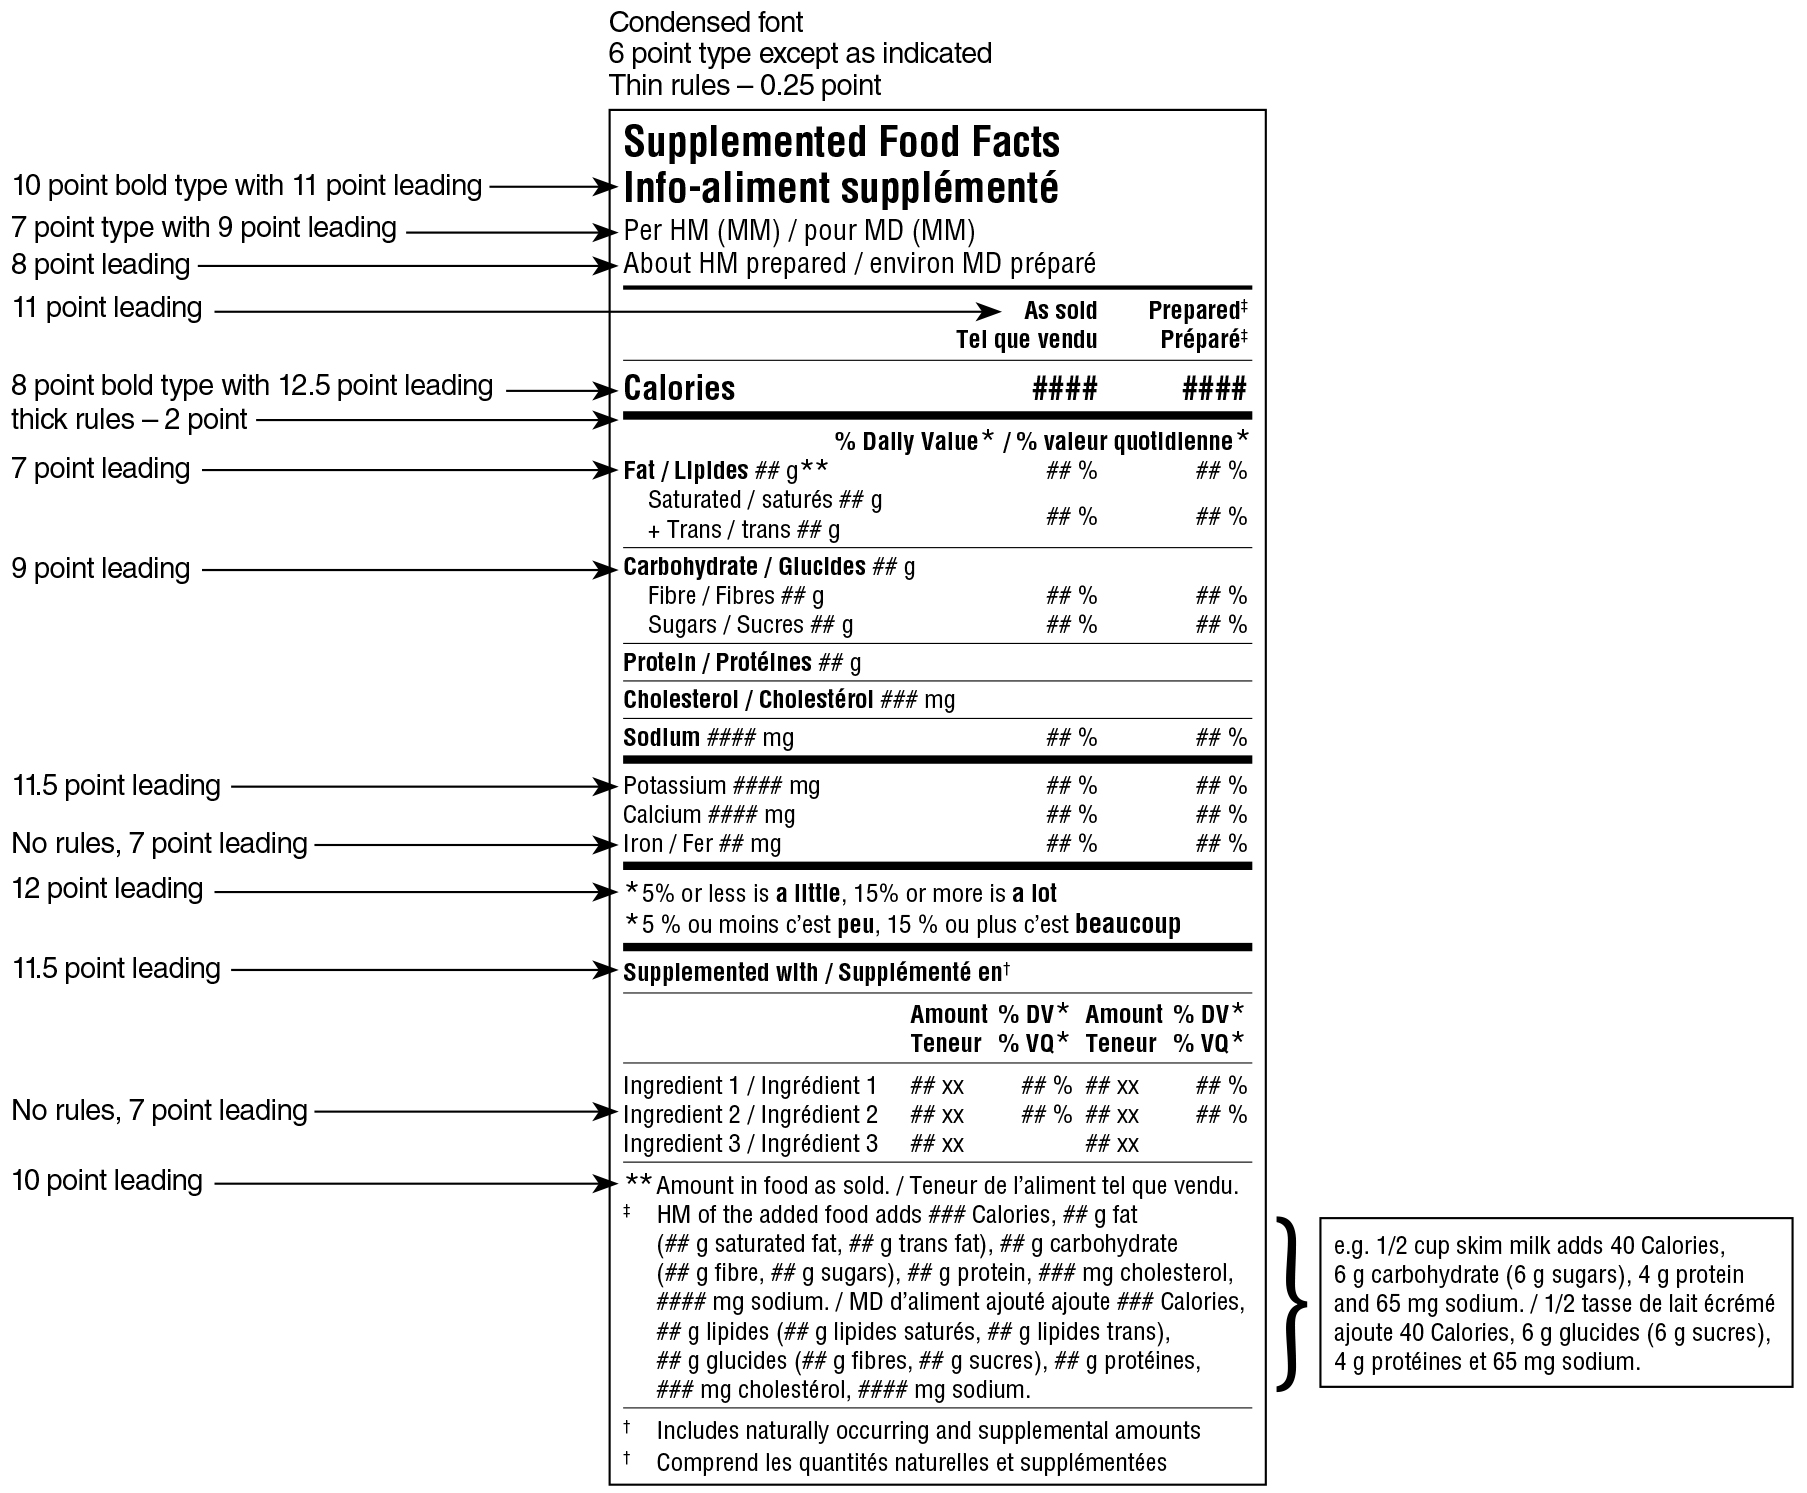 A bilingual Supplemented Food Facts table in dual format for food requiring preparation surrounded by specifications. Text version below.